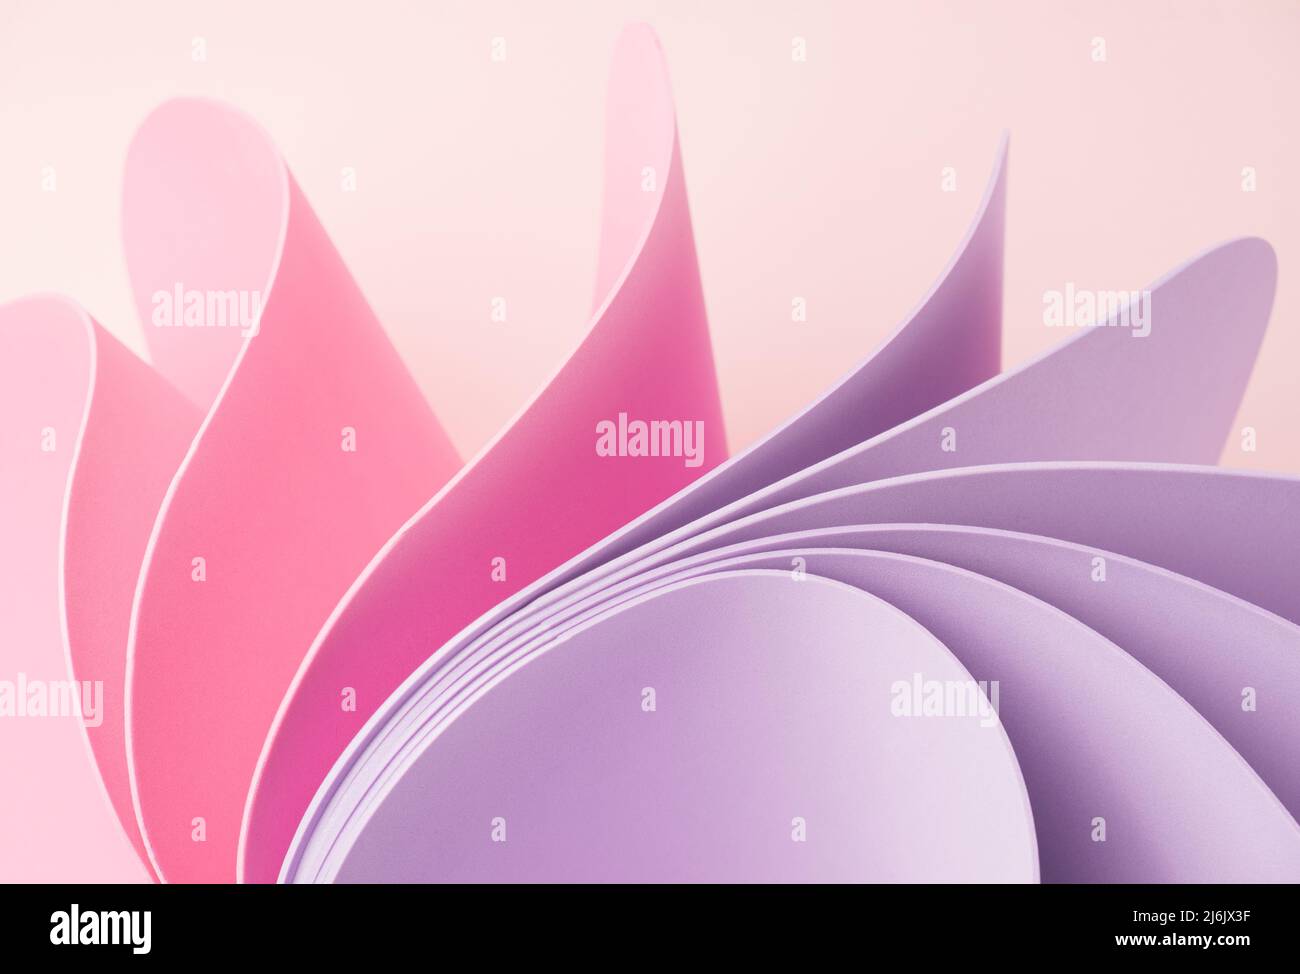 Dynamic motion abstract elements with pink and periwinkle sheets. Elegant abstract background Stock Photo